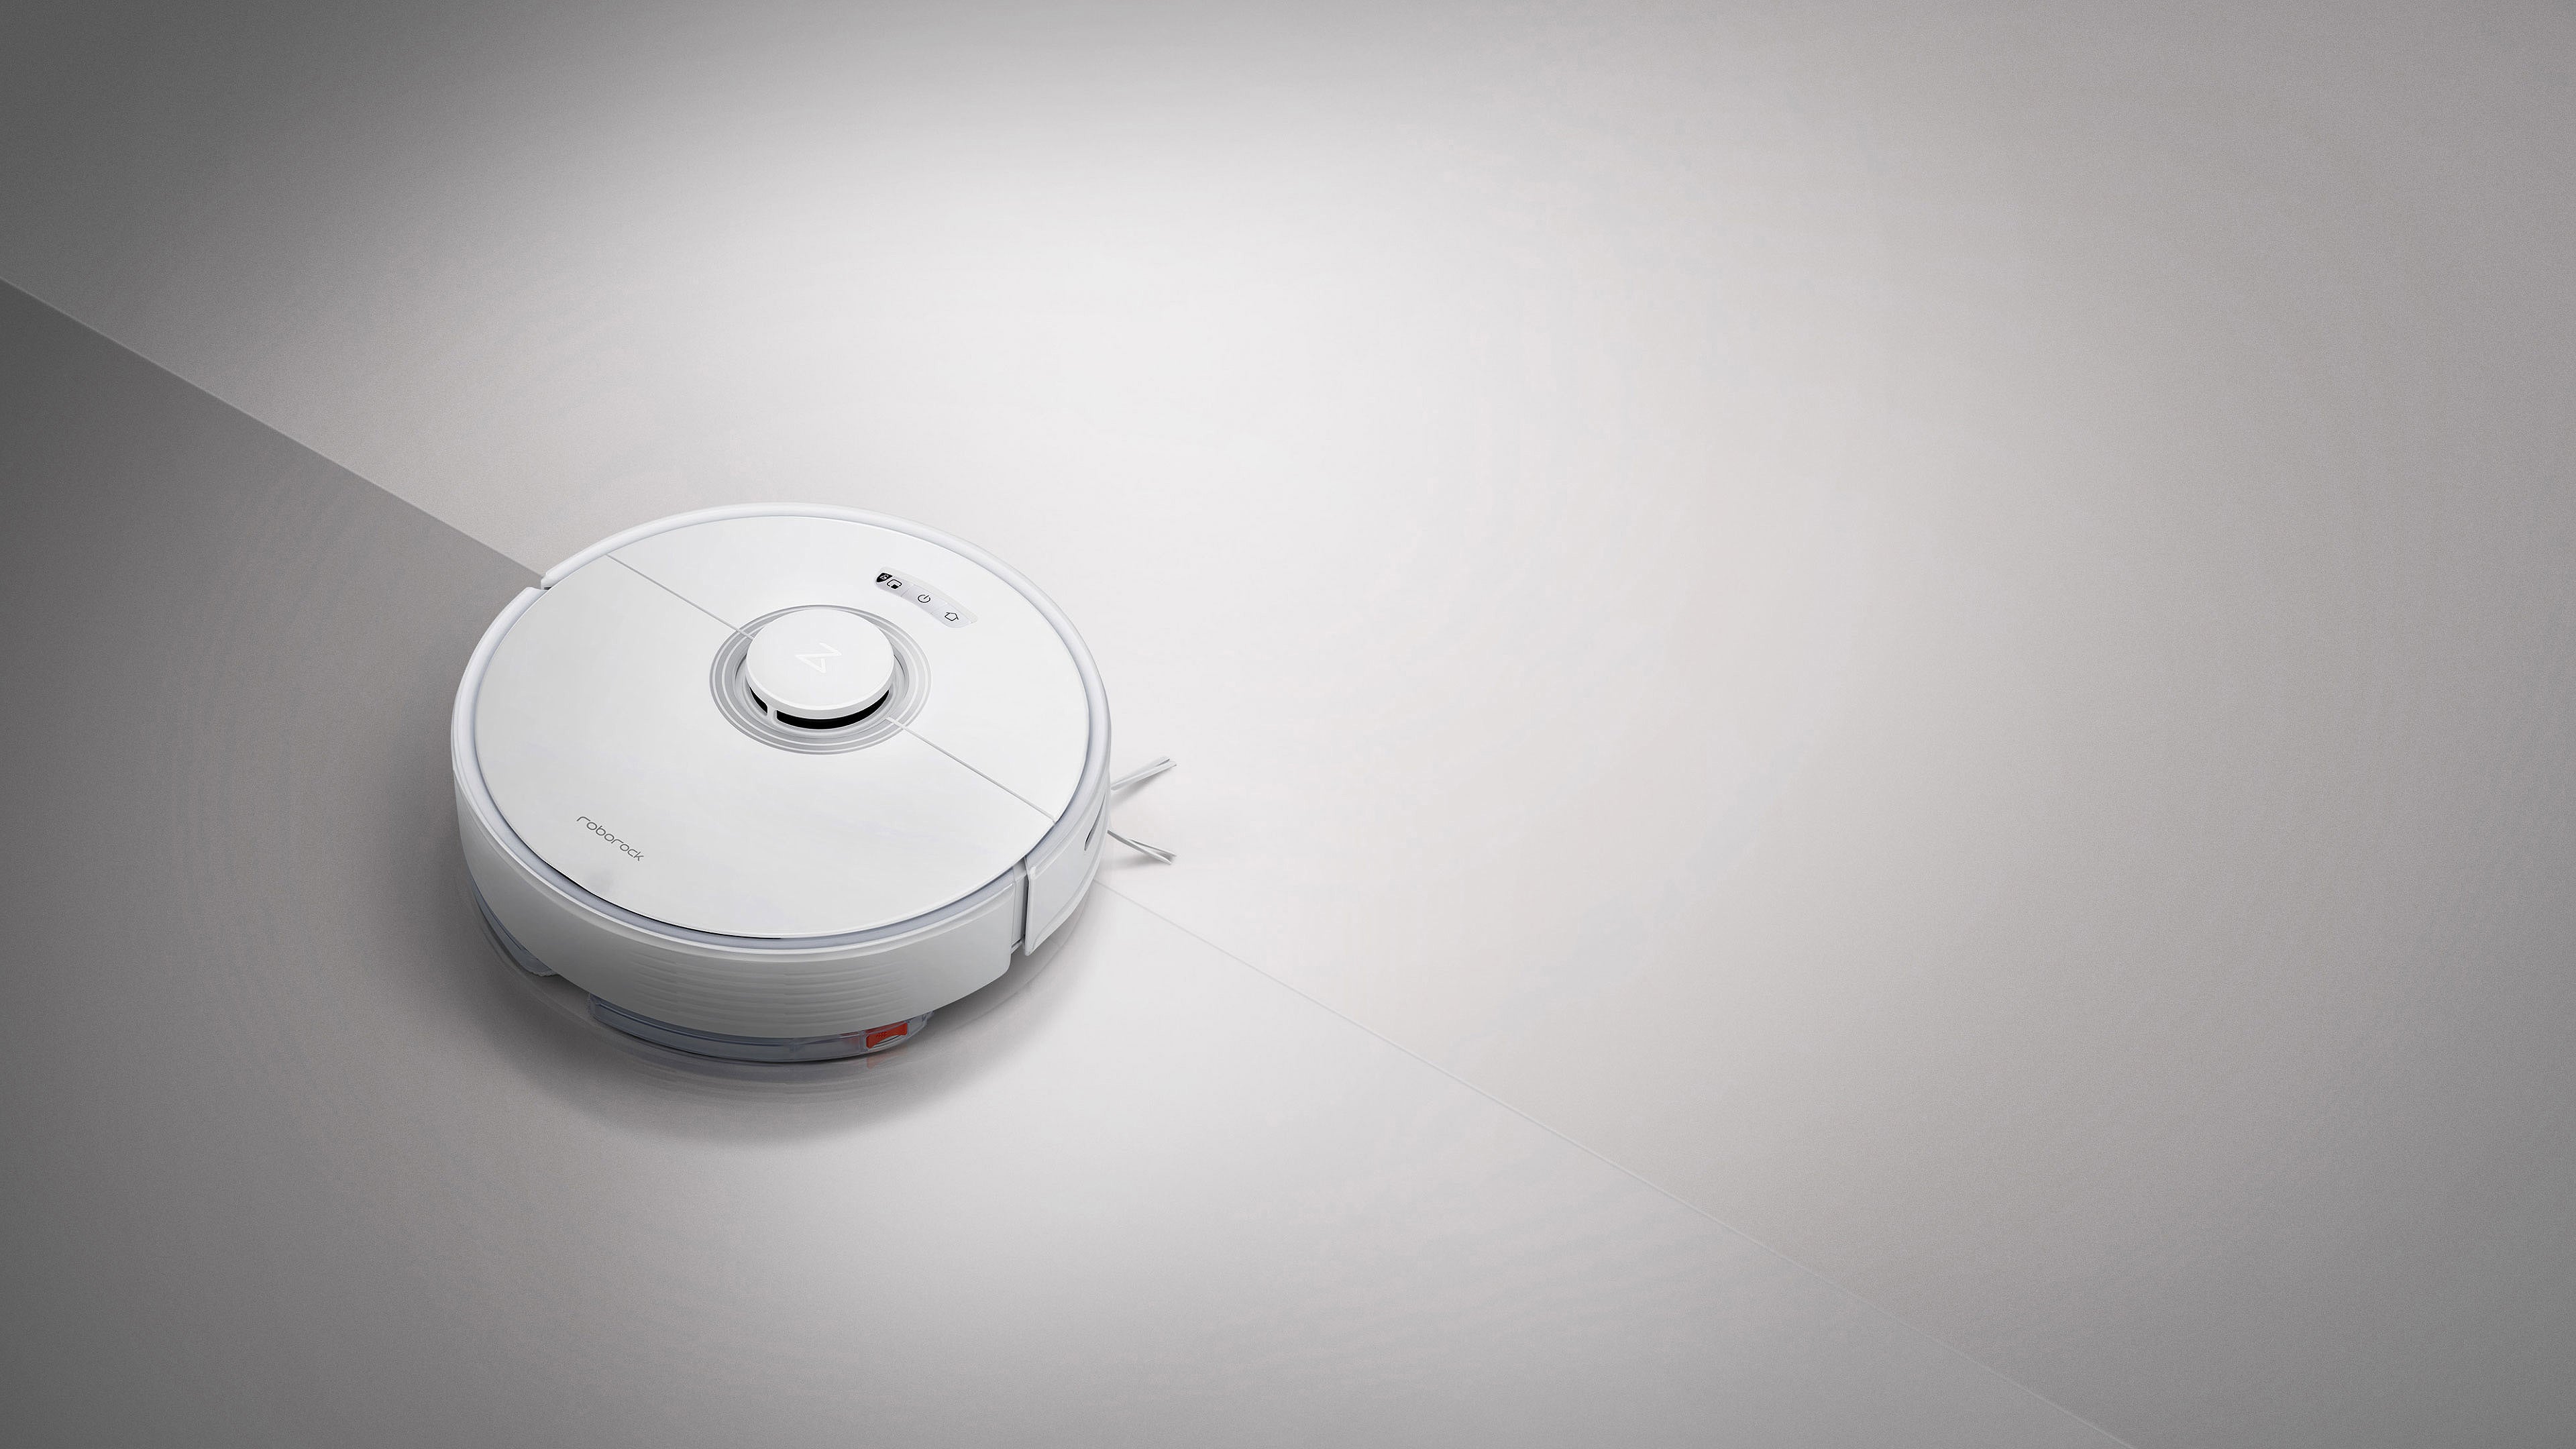 Roborock Q7 Series - Simple Cleaning. Simpler Emptying.